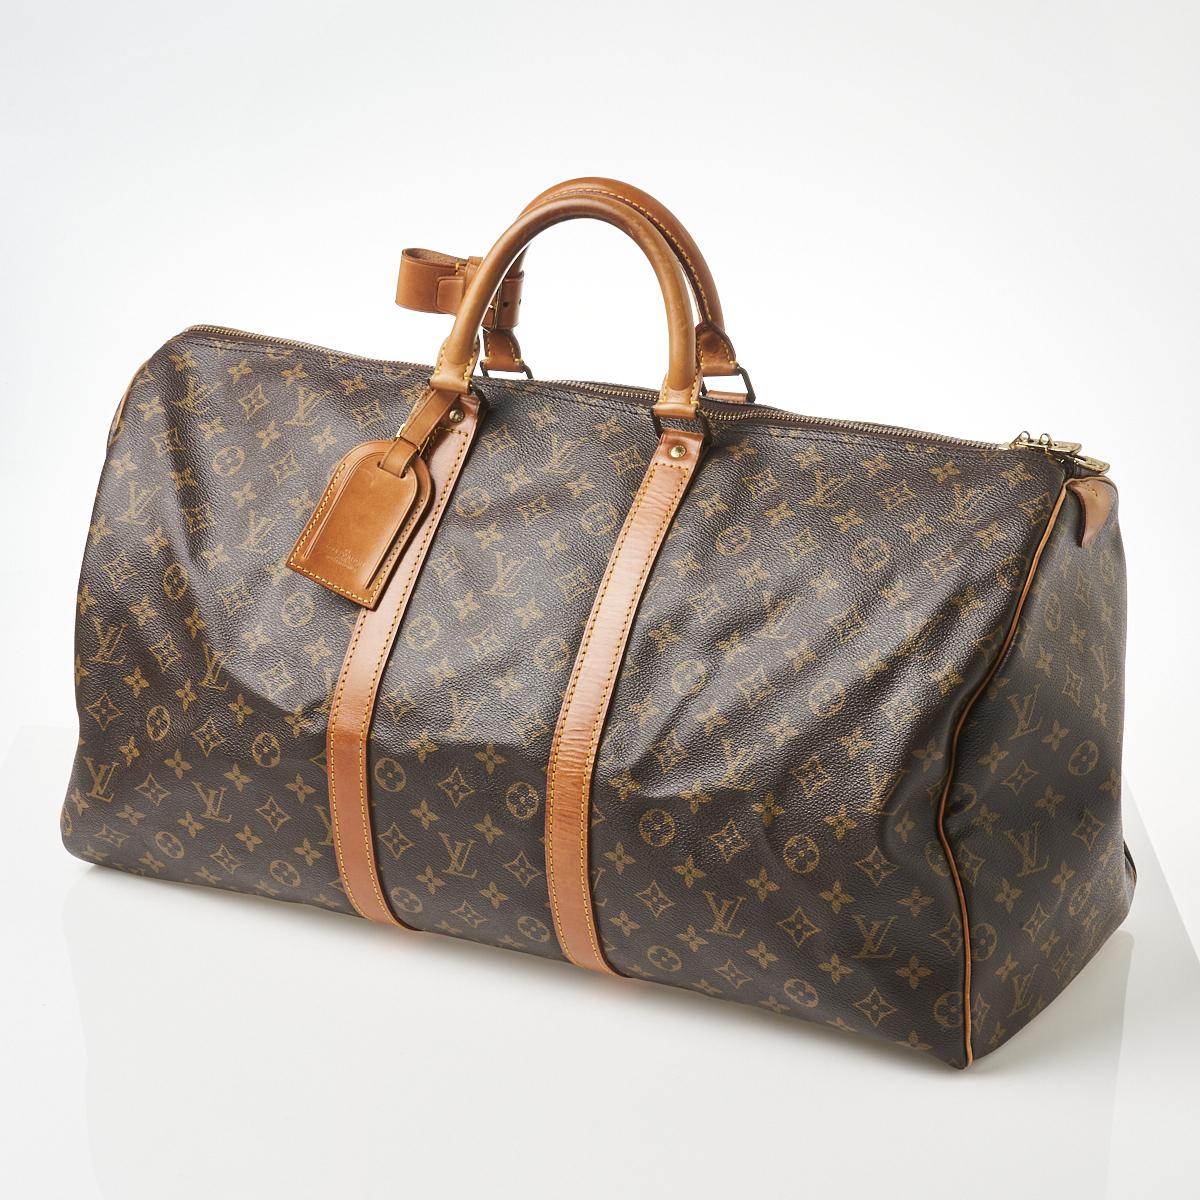 Sold at Auction: Louis Vuitton Epi Leather Keepall 55 Duffle